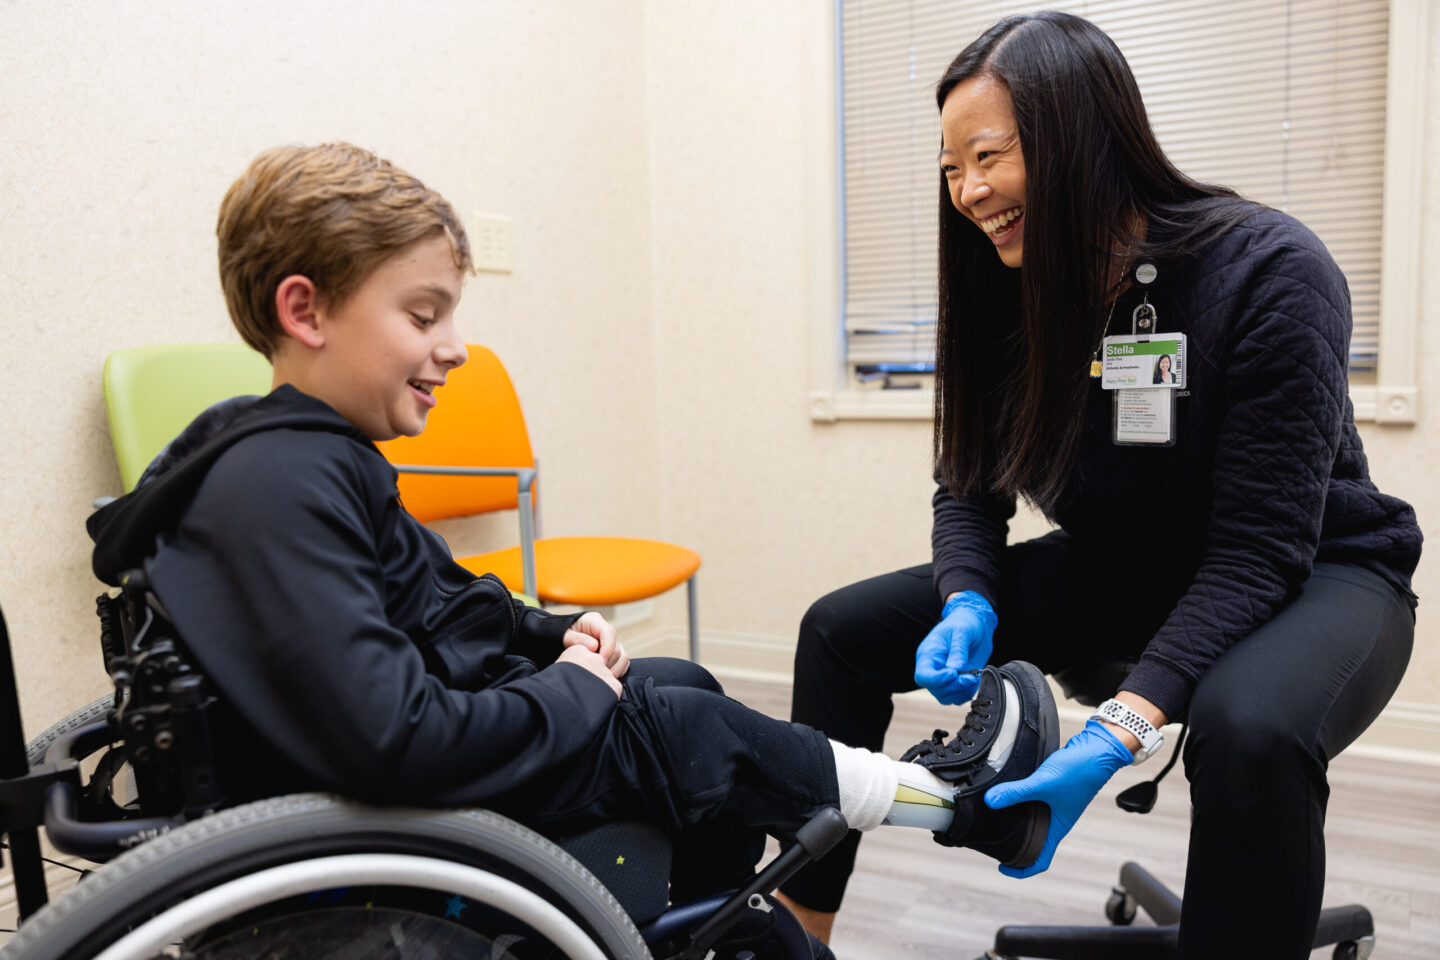 A young boy in a wheelchair laughs during his orthotics fitting.